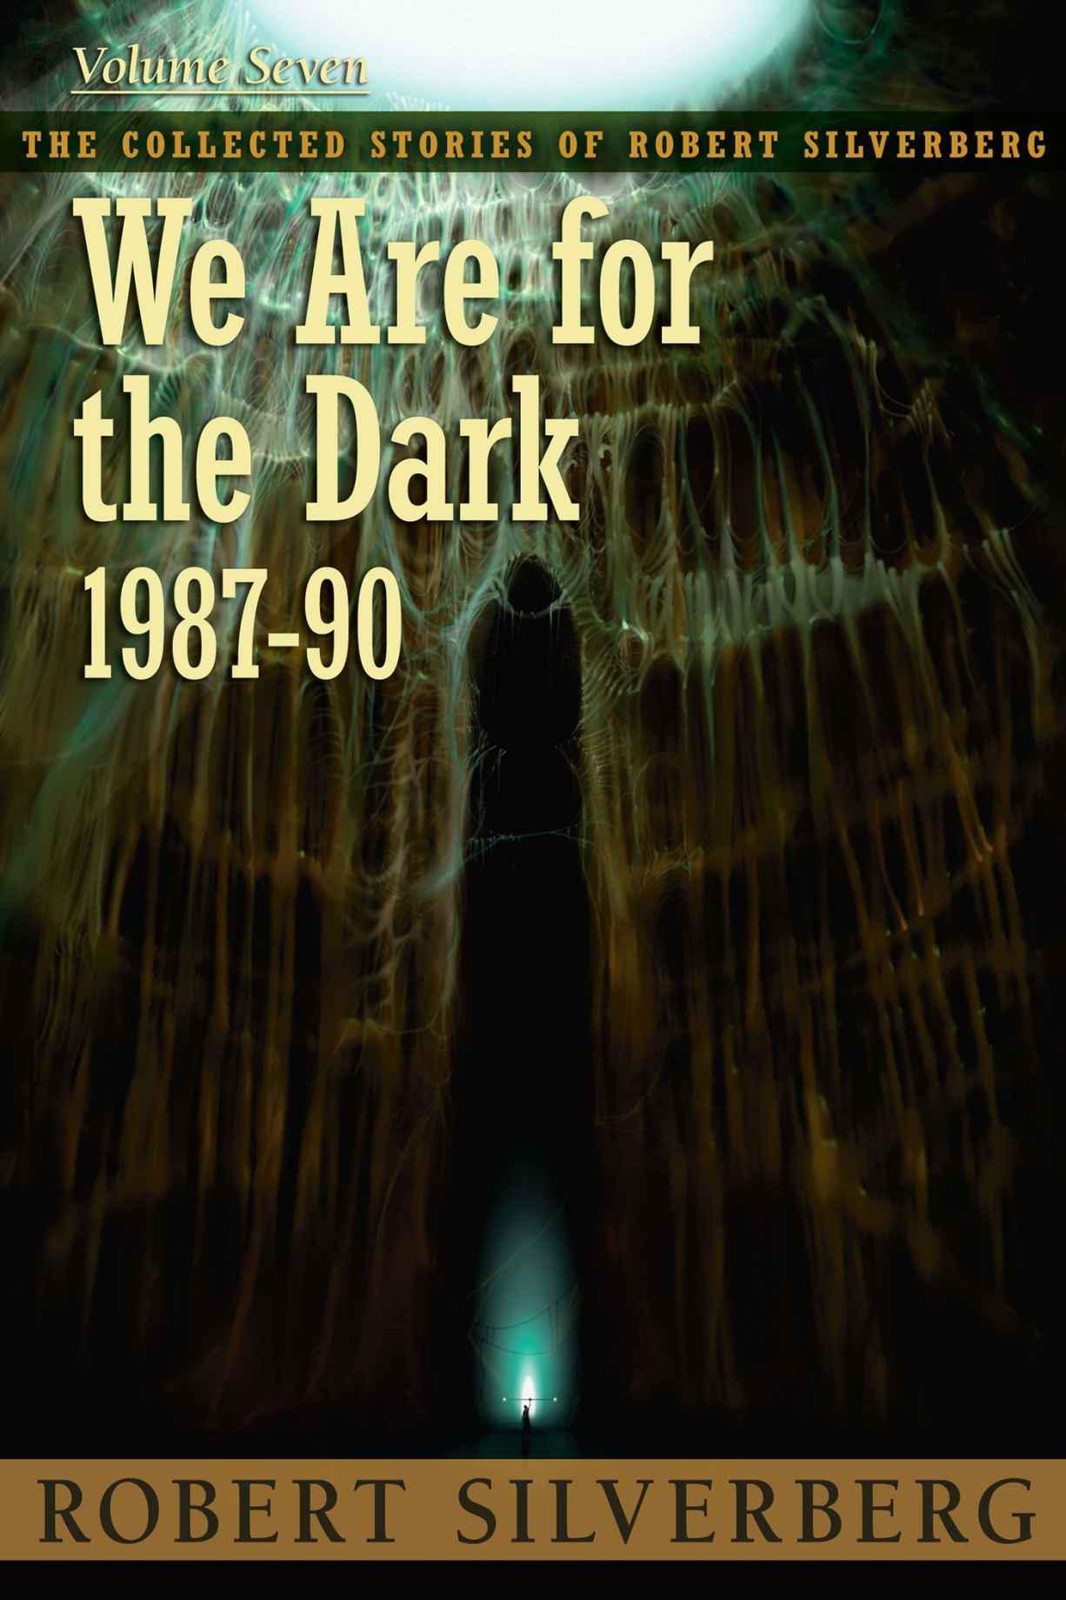 We Are for the Dark (1987-90)